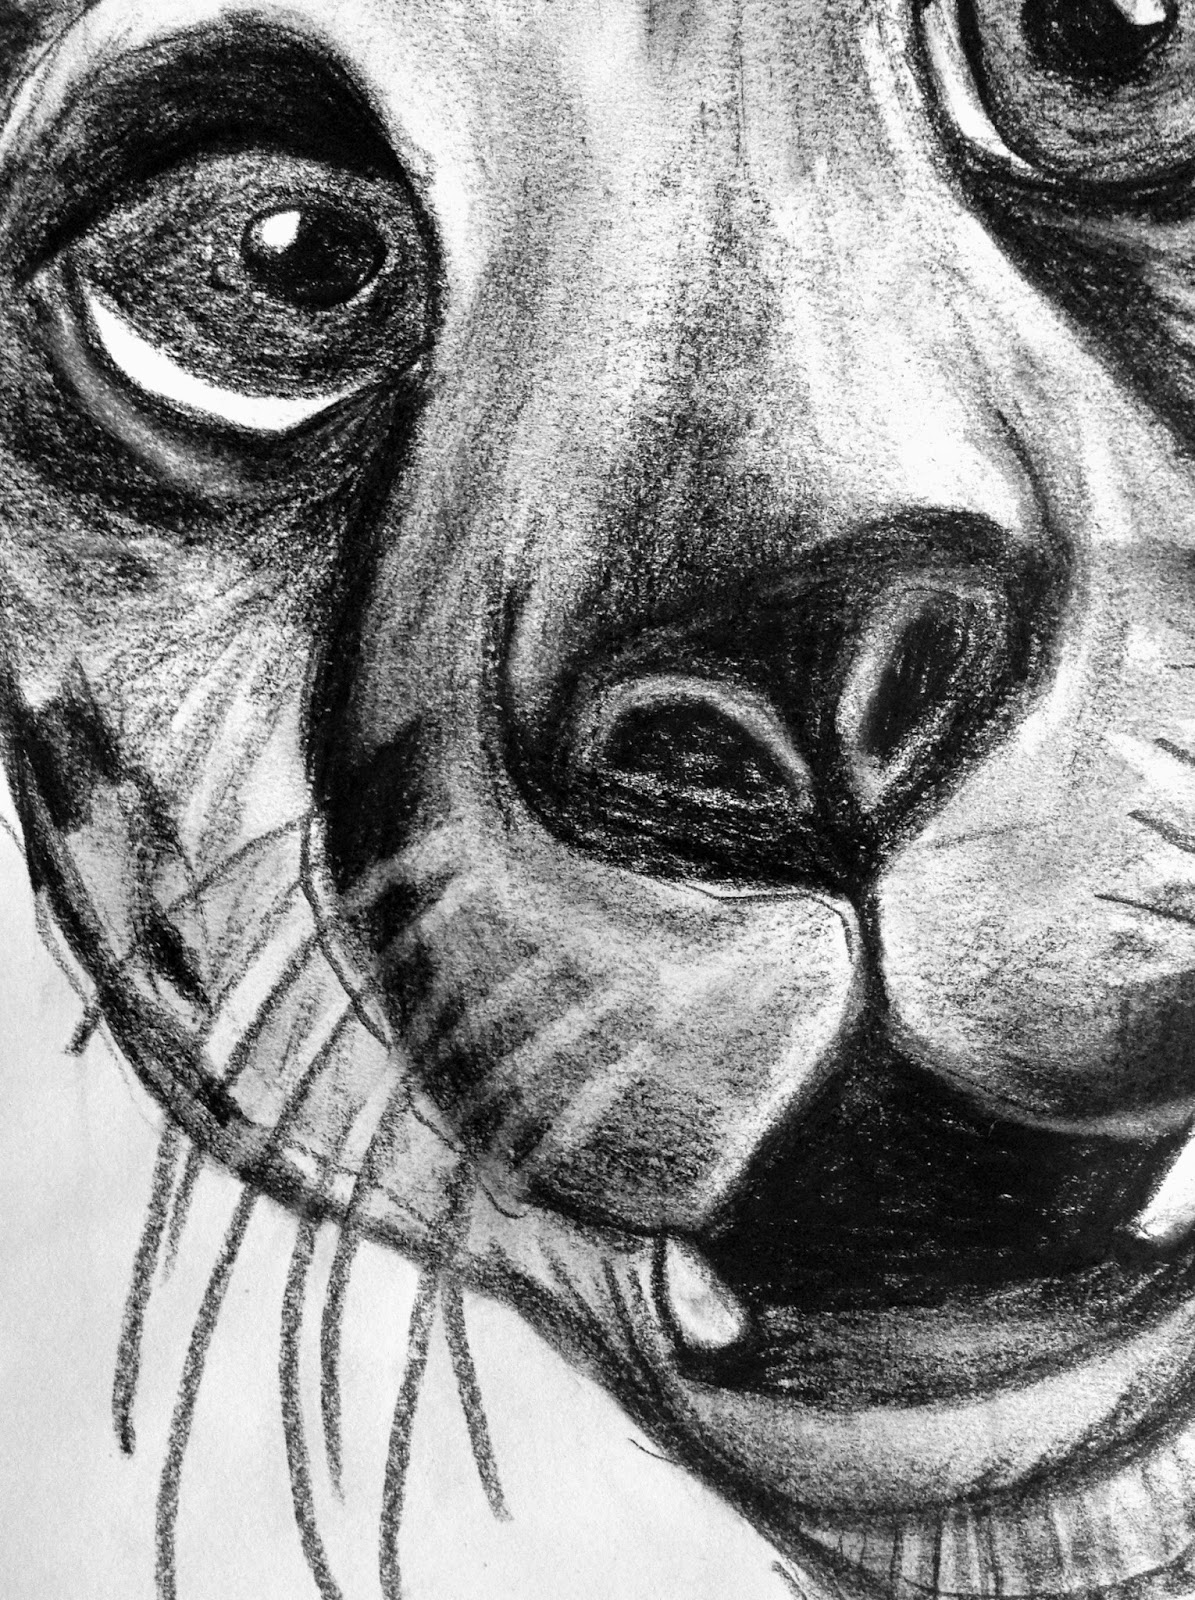 One Point Perspective Charcoal Distorted Animals Drawing nature and landscapes : one point perspective charcoal